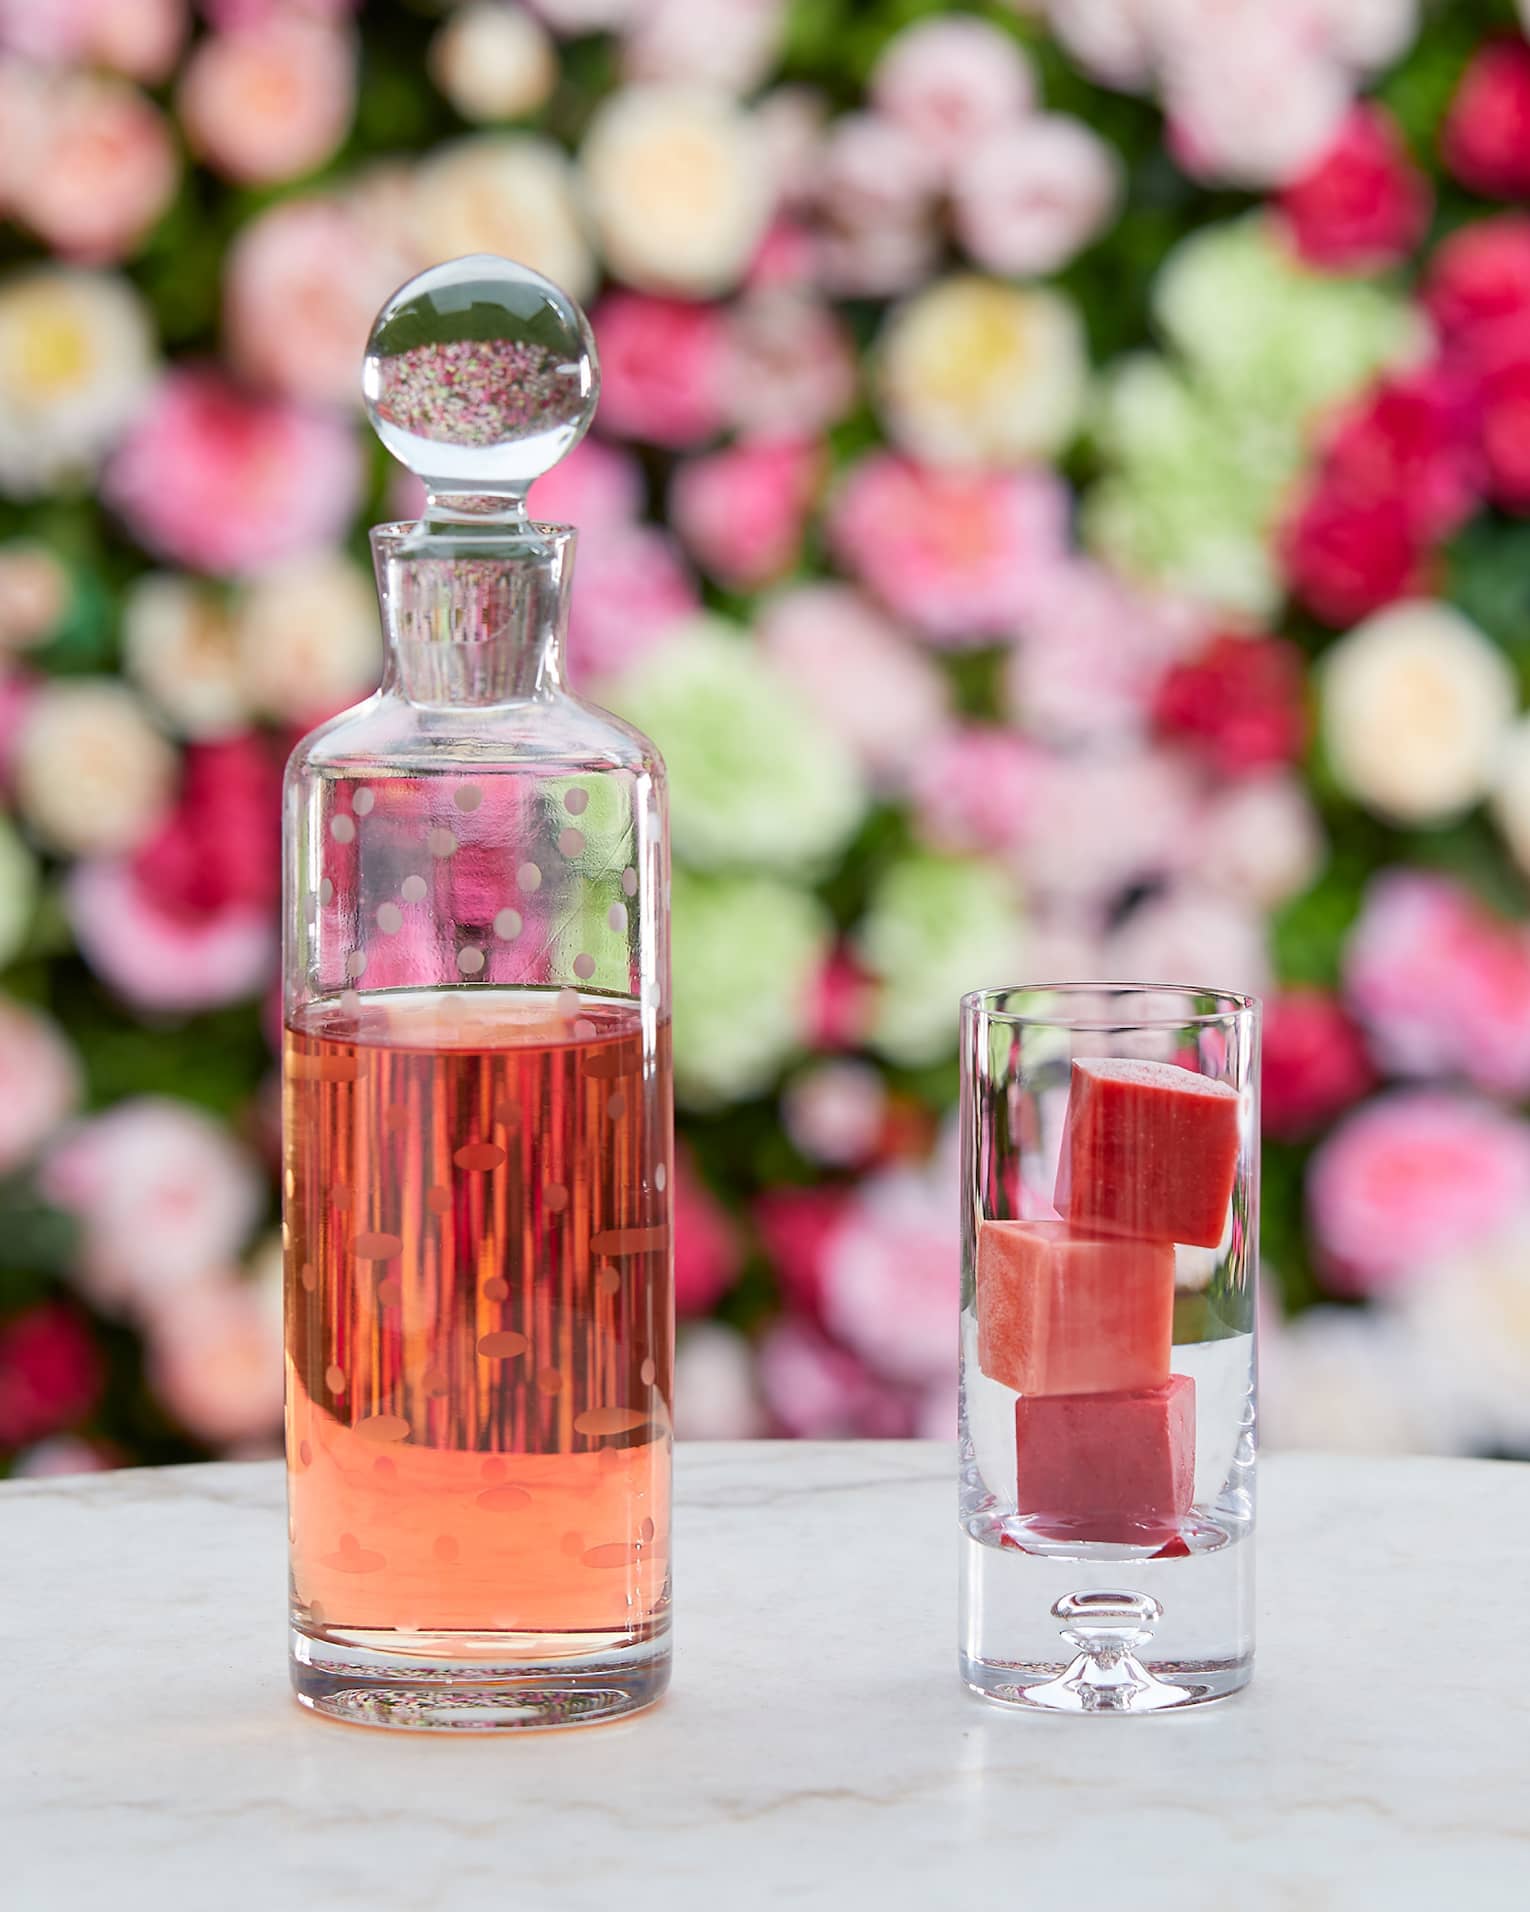 A cocktail and glass bottle in front of a wall of roses.